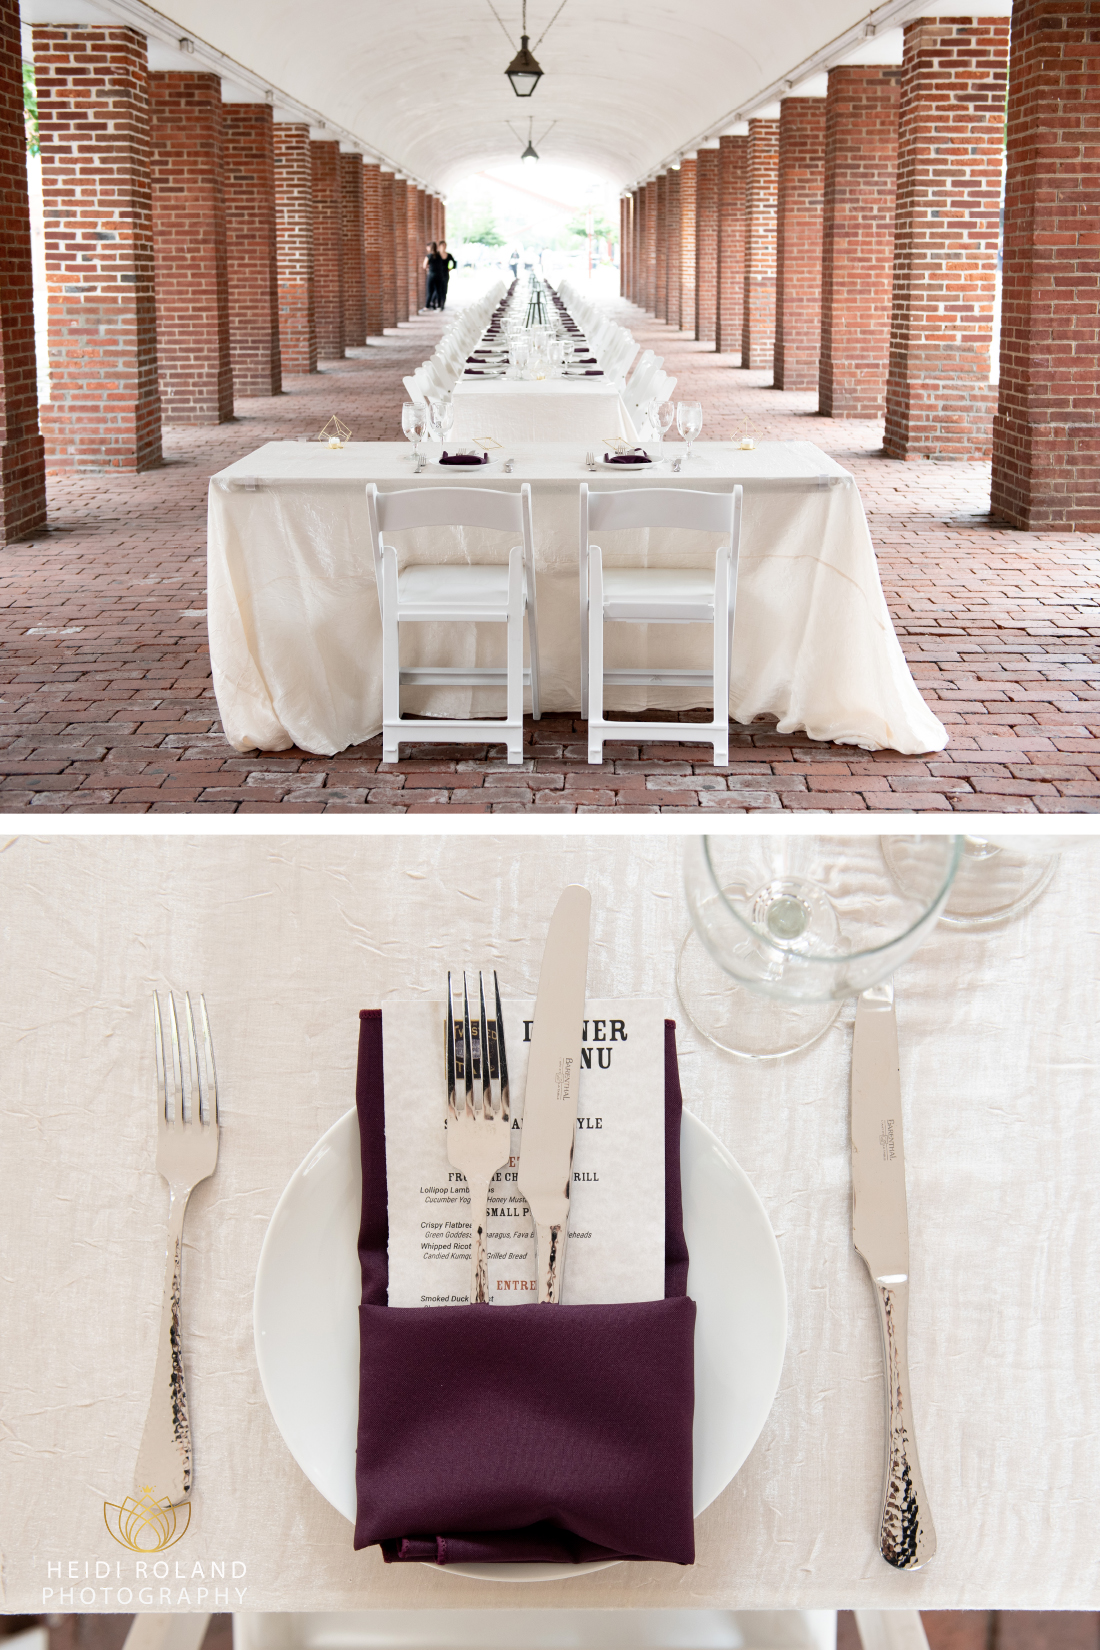 The Shambles Headhouse Square Wedding reception dinner table set up in Philadelphia PA